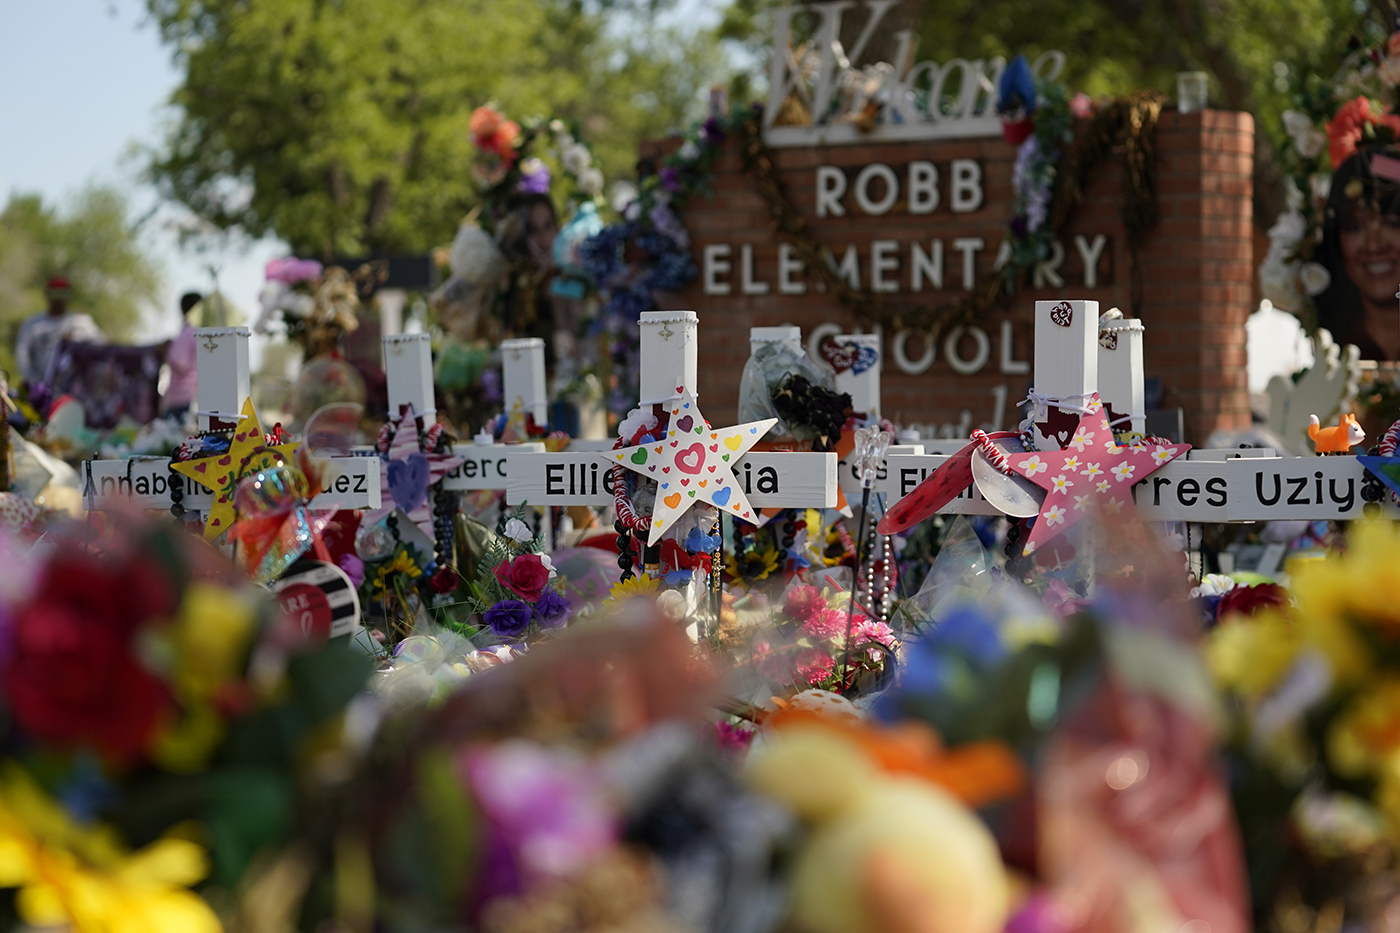 Memorials outside of the Robb Elementary School